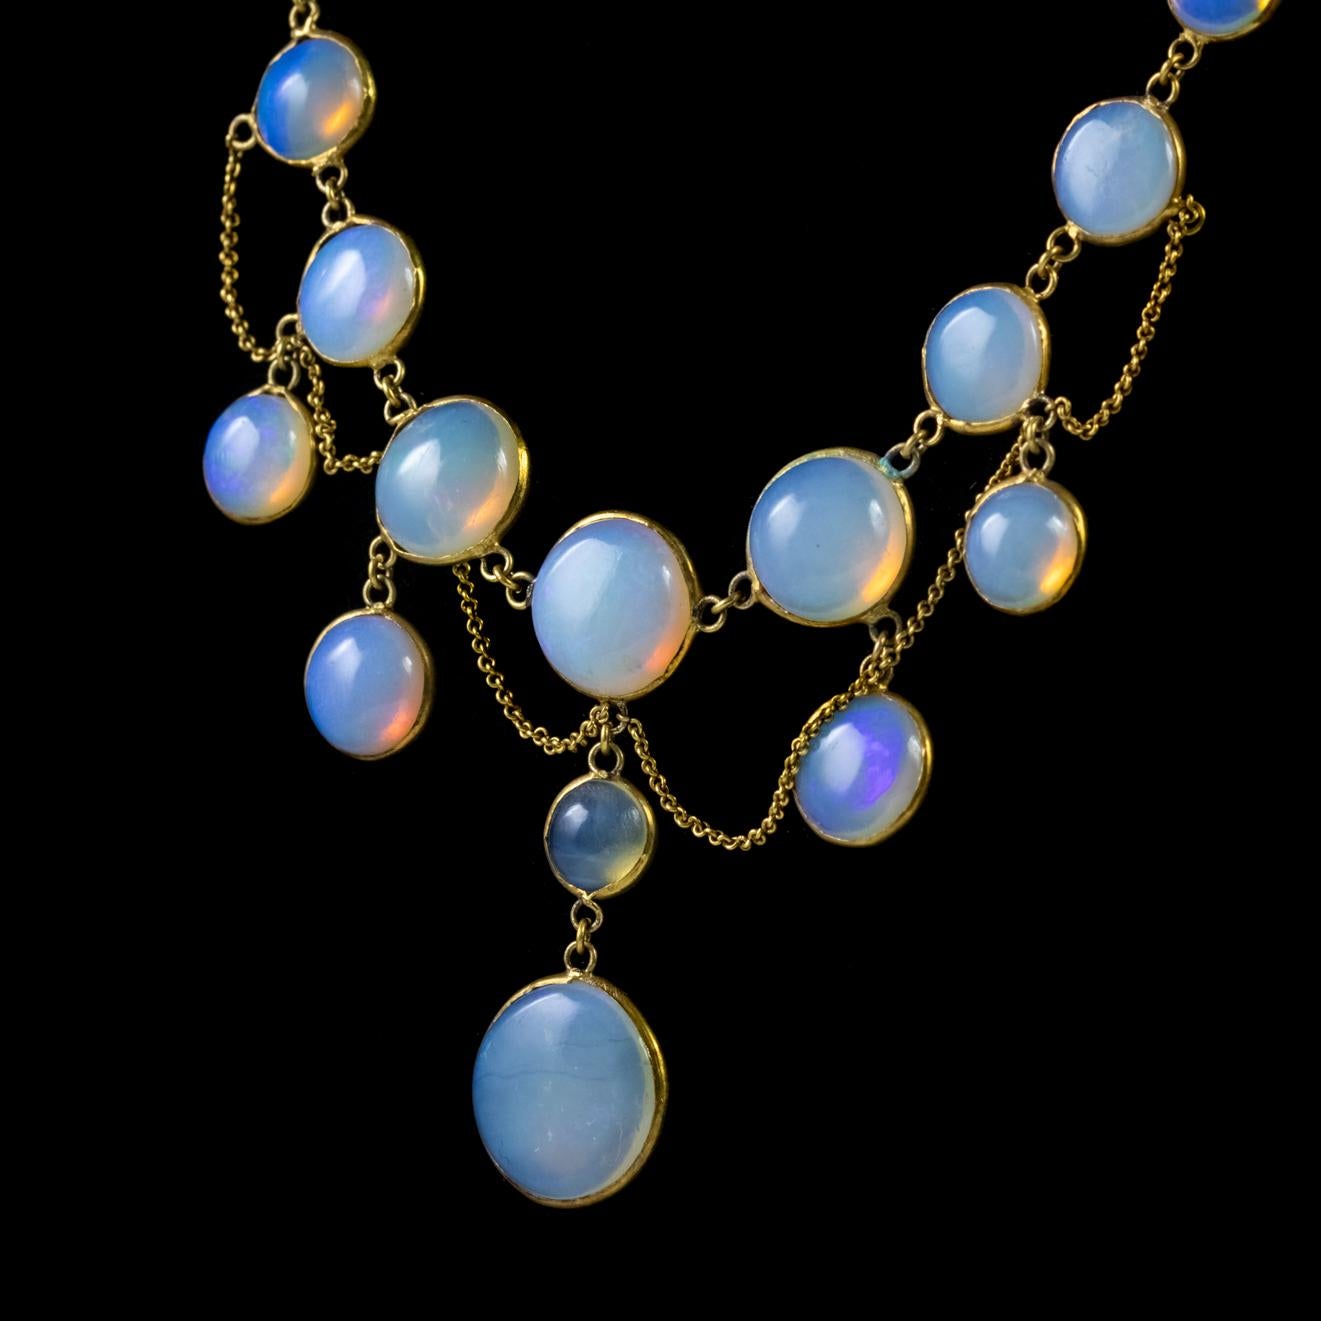 This wonderful Victorian festoon necklace has been lovingly crafted in 18ct Yellow Gold and adorned with fifteen beautiful cabochon cut natural Opals. The largest opal is 4ct alone, in total the stones add up to over 20ct.

The fine links that